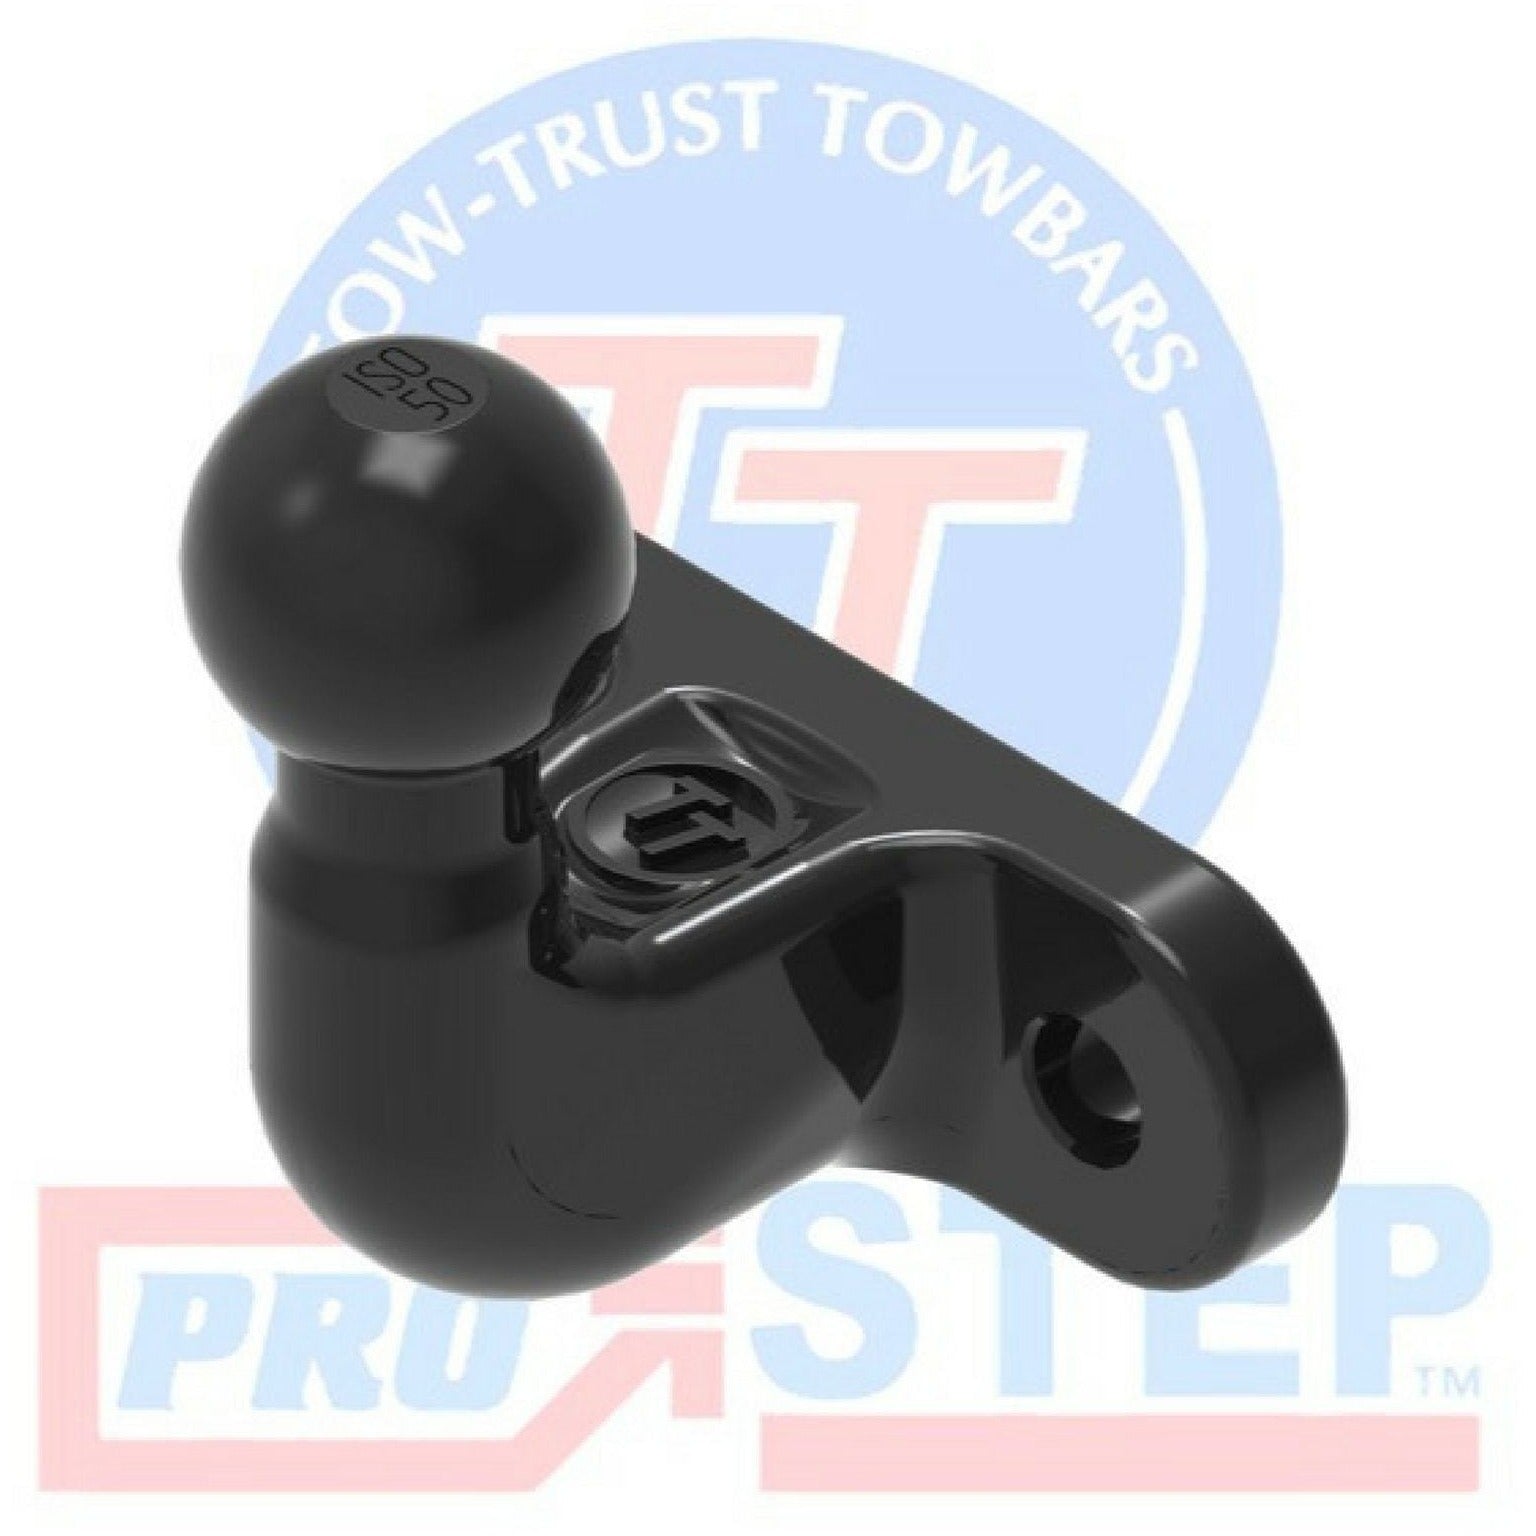 Tow Trust Autotrail Towbar (TAUT2) - Quality Caravan Awnings